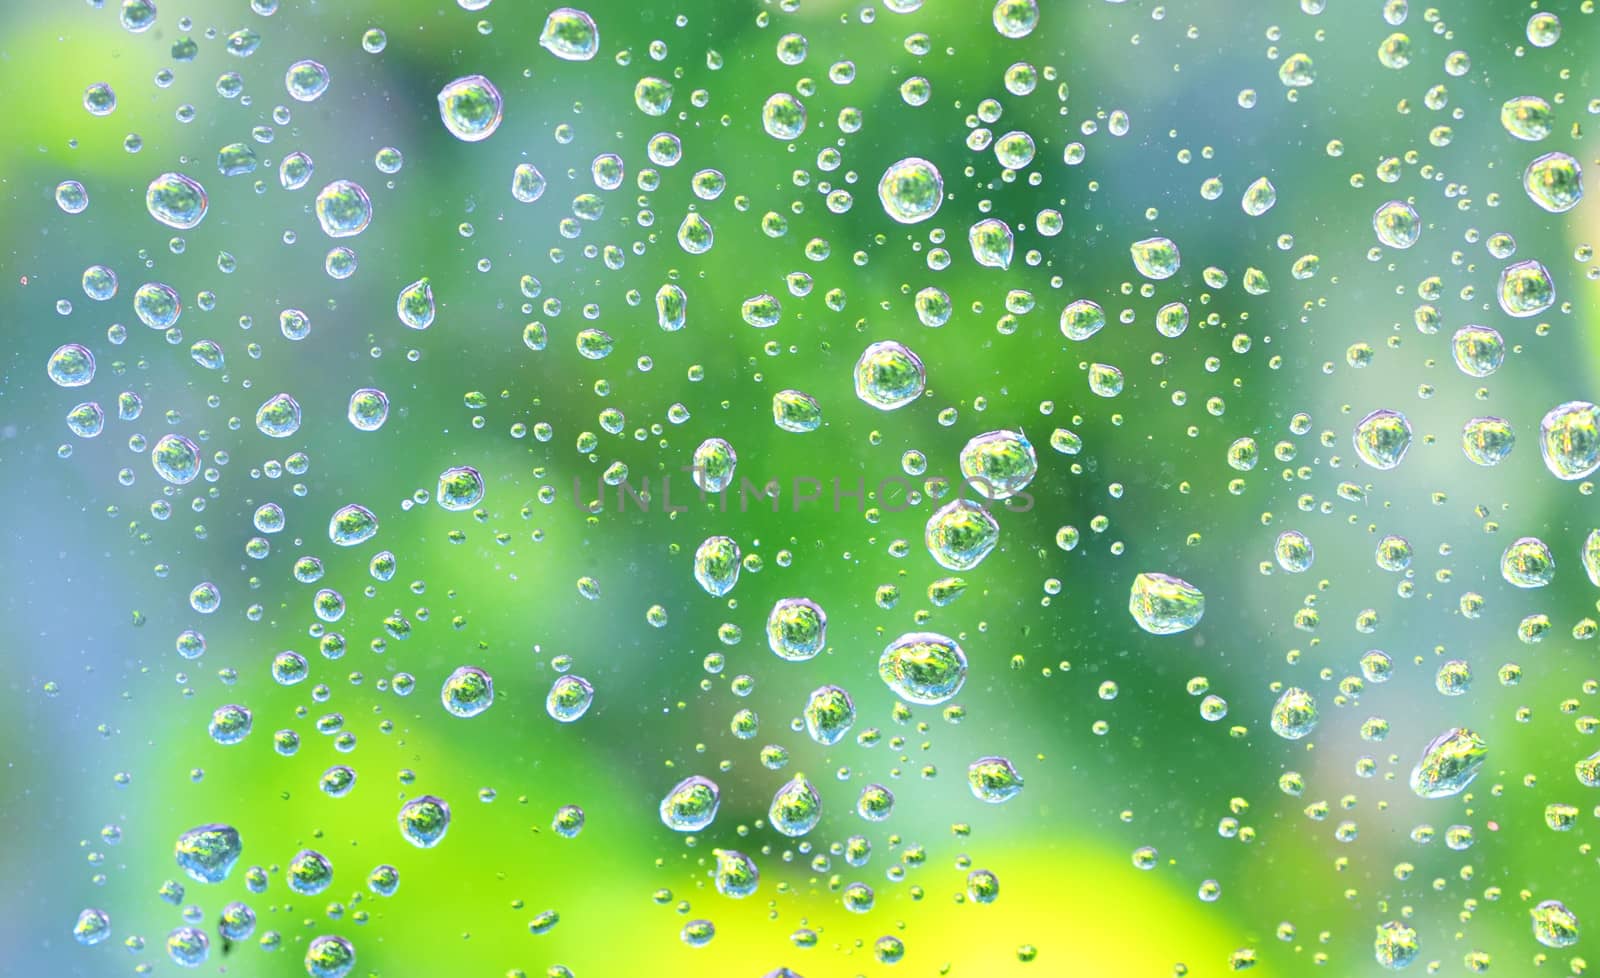 Drops of rain on the glass  by mady70